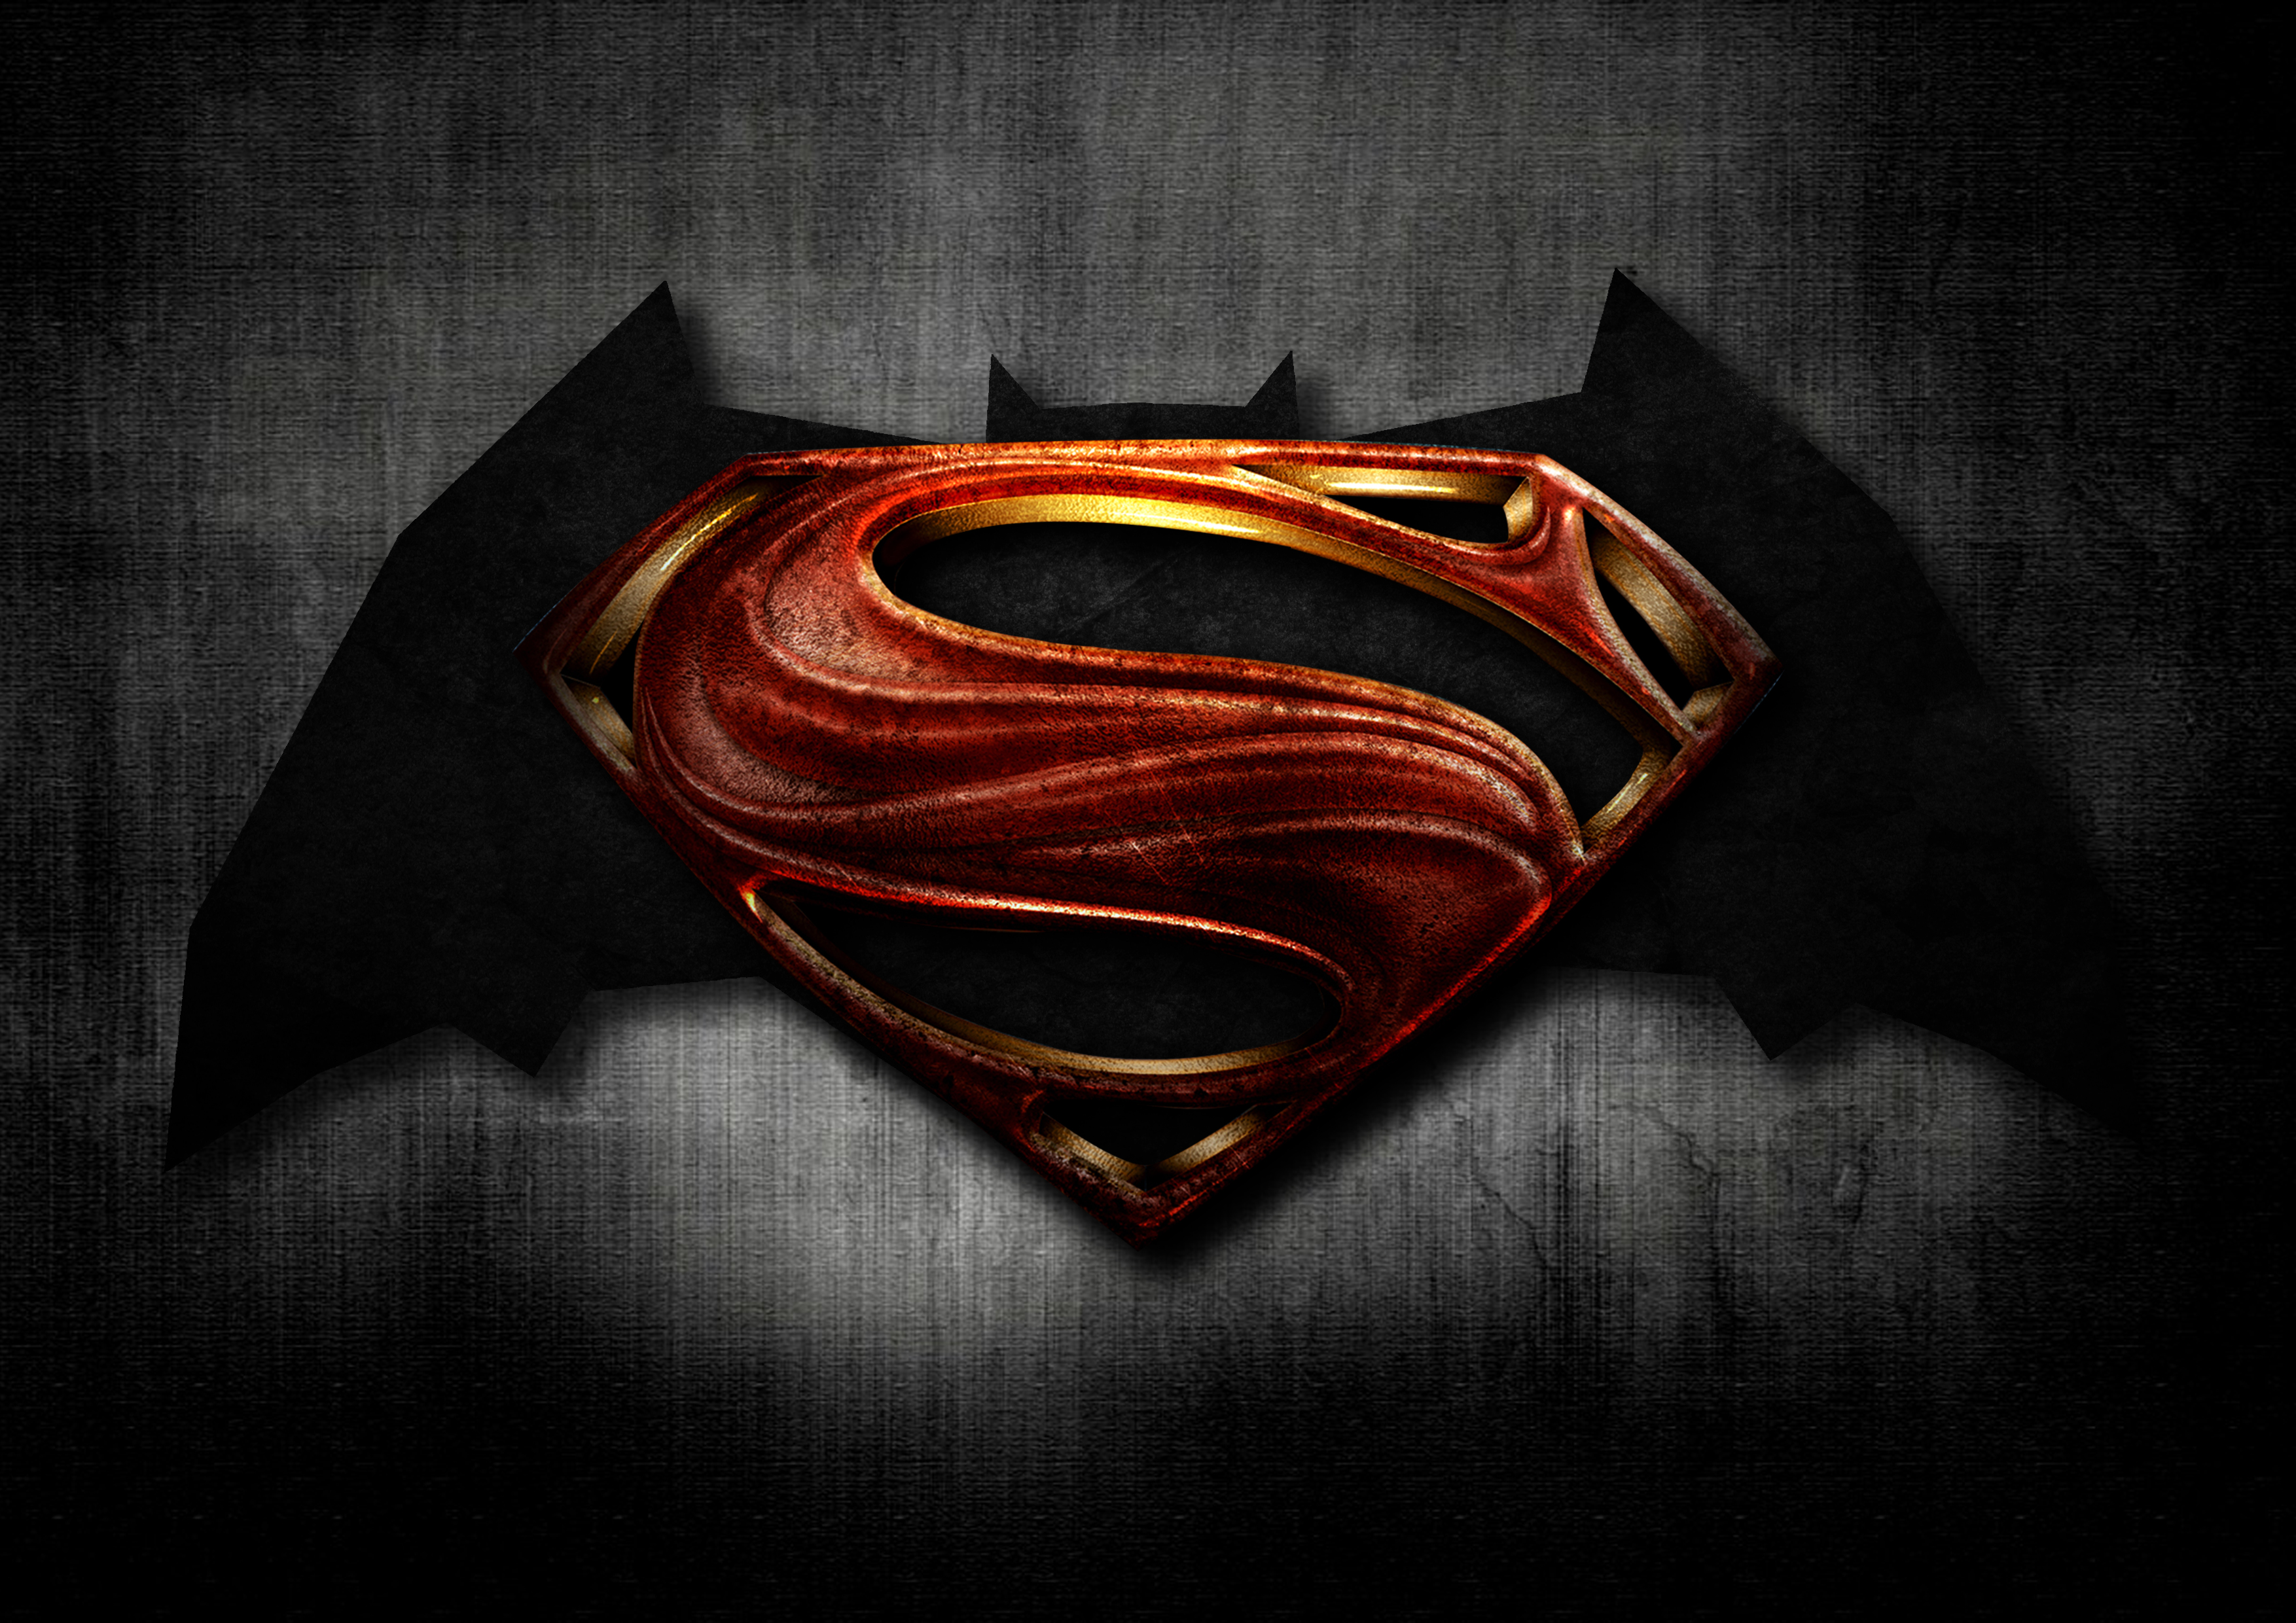 And Superman Movie Logo By Andrewmjbaker Designs Interfaces Logos